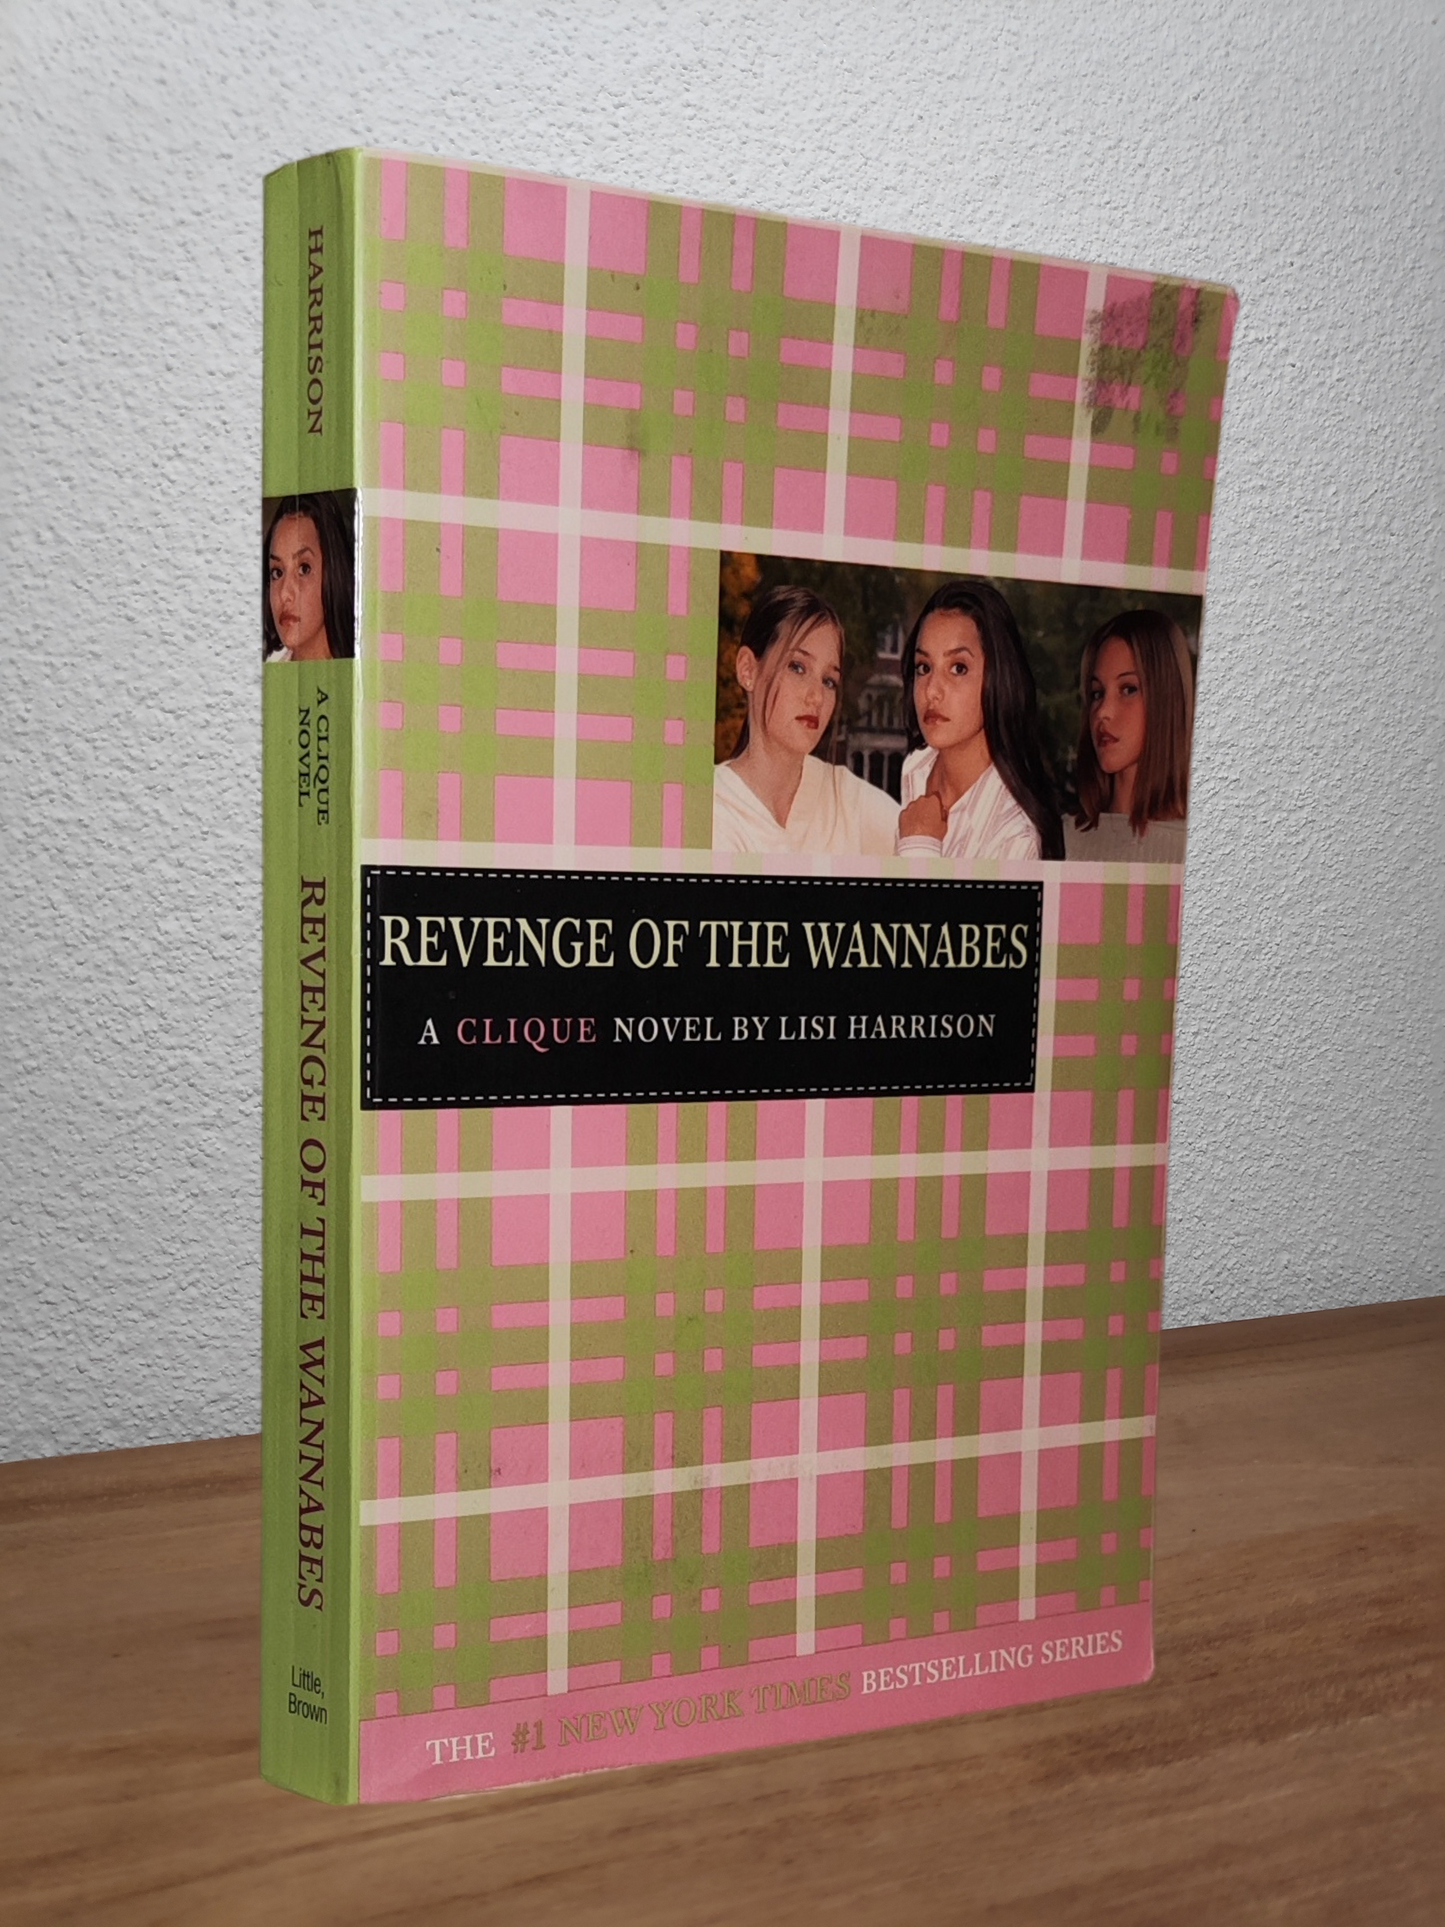 Lisi Harrison - Revenge of the Wannabes  - Second-hand english book to deliver in Zurich & Switzerland